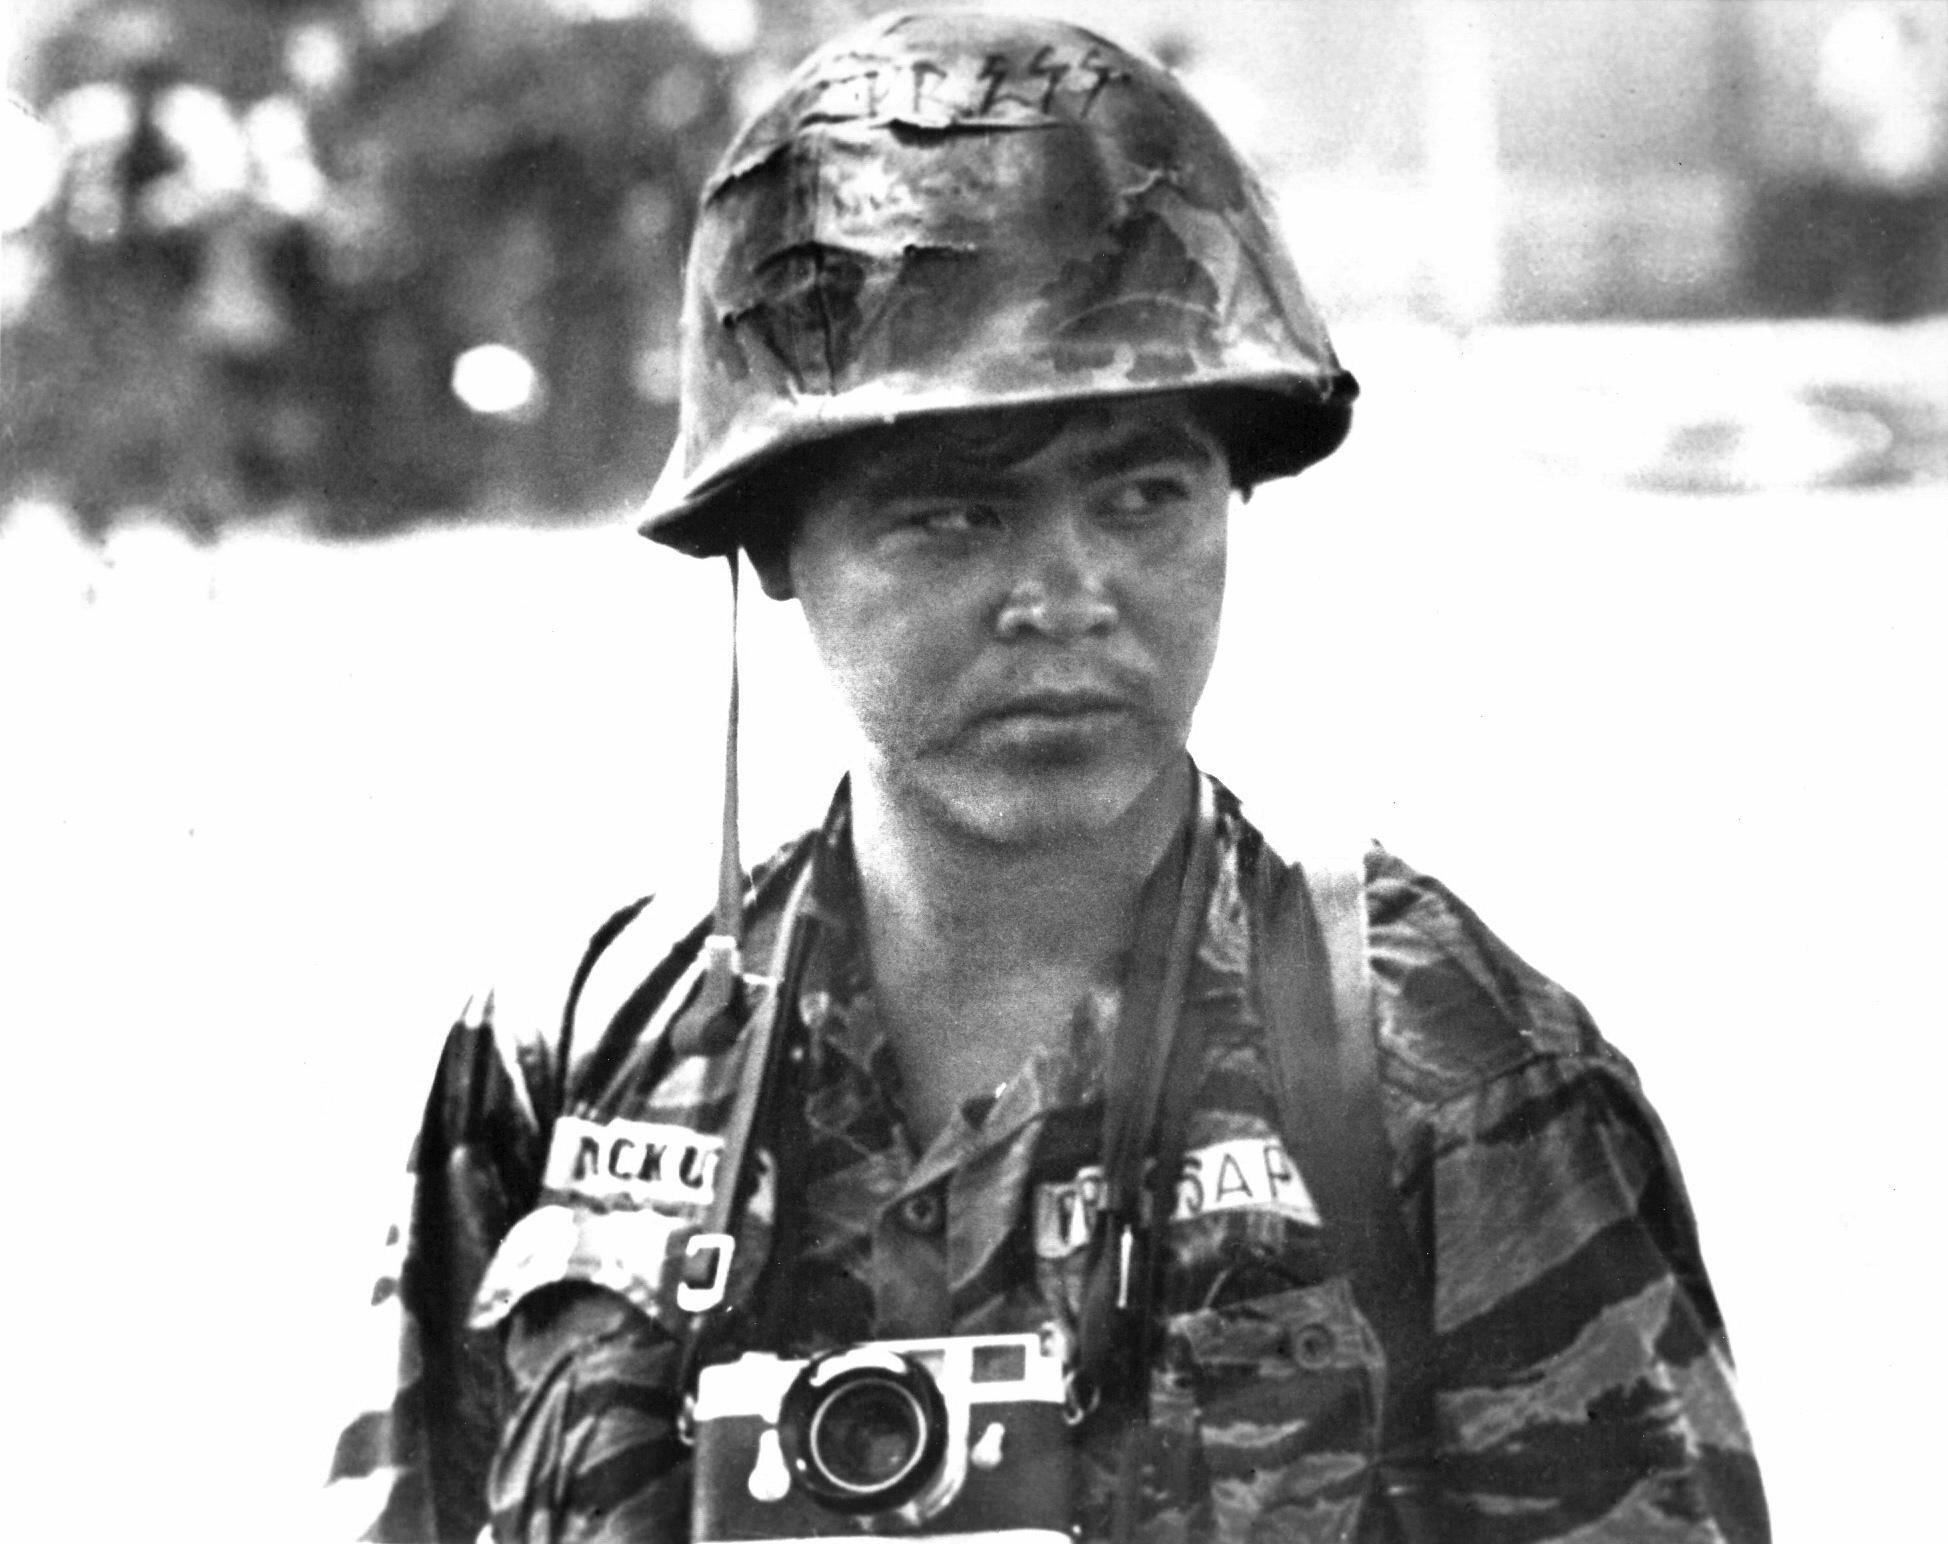 AP photographer Nick Ut in his combat fatigues and a camera around his neck